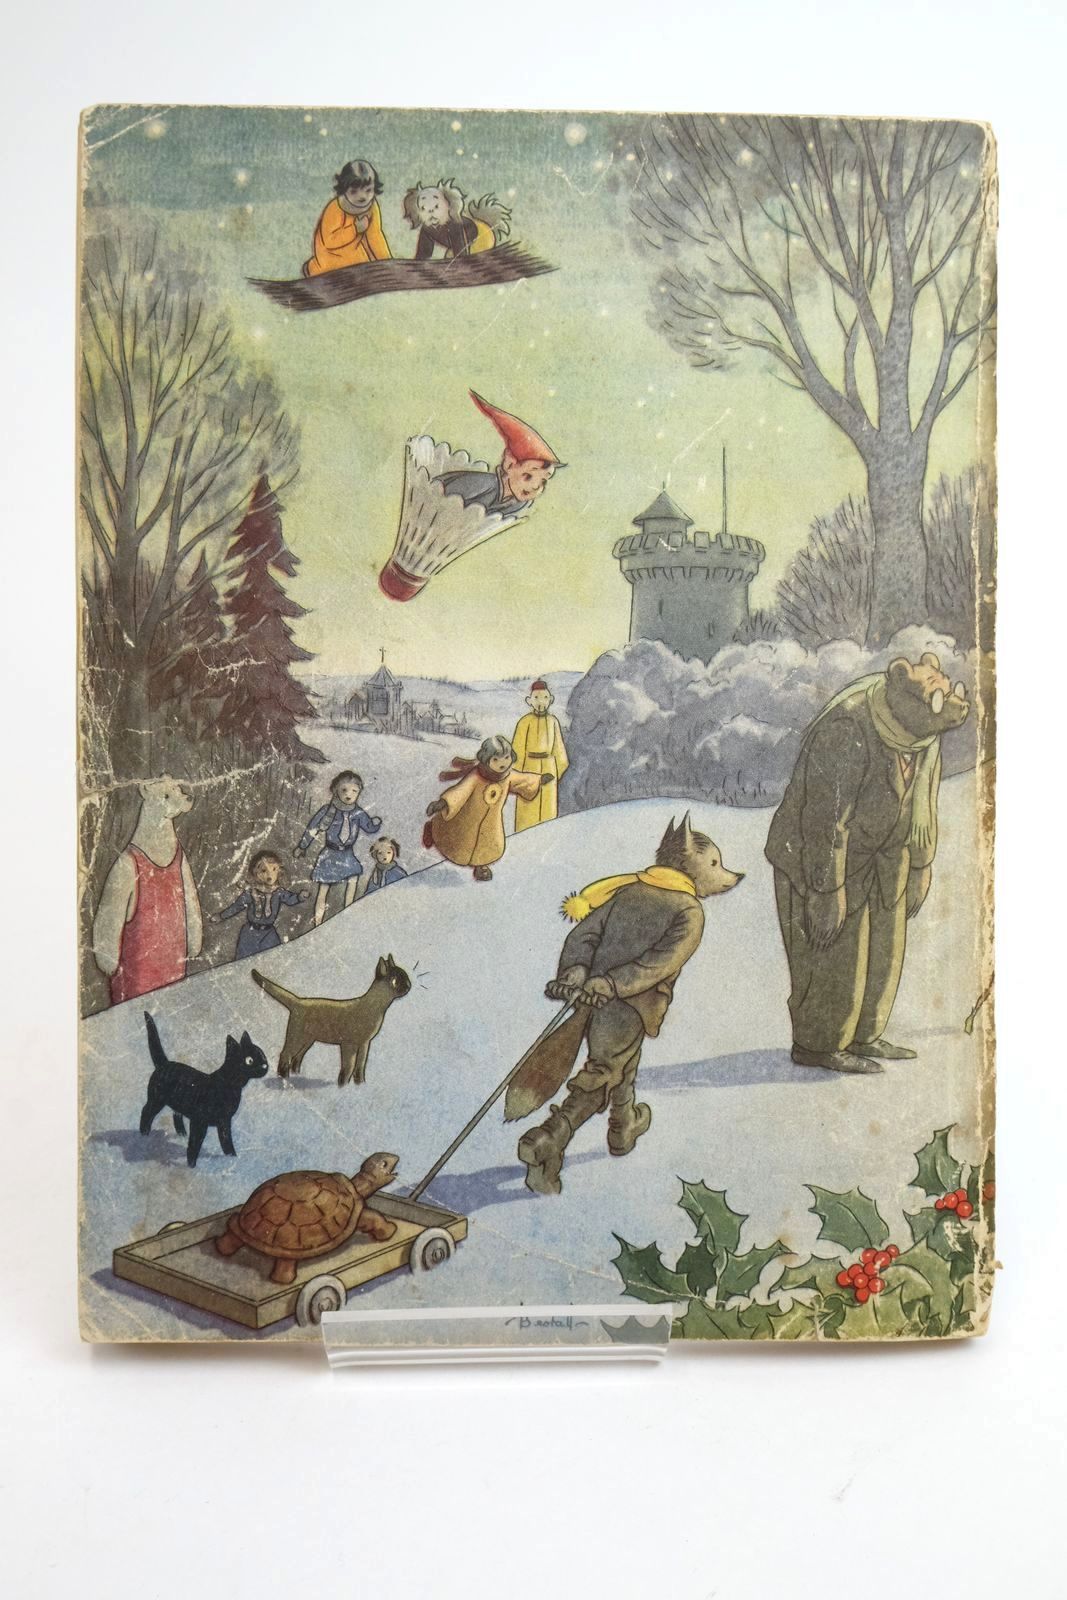 Photo of RUPERT ANNUAL 1949 written by Bestall, Alfred illustrated by Bestall, Alfred published by Daily Express (STOCK CODE: 1321970)  for sale by Stella & Rose's Books